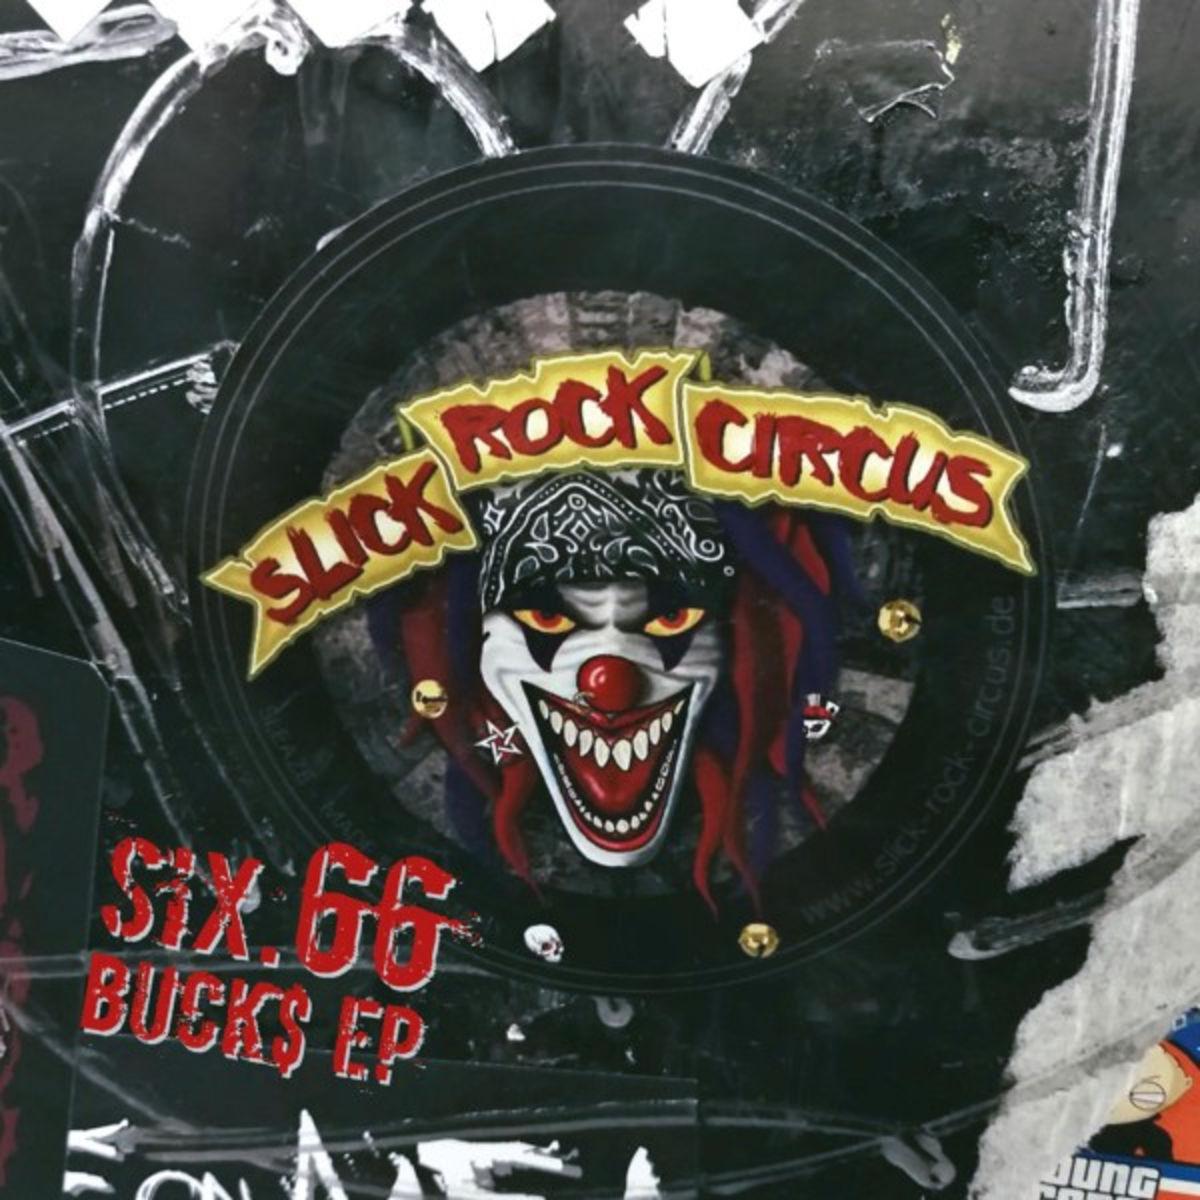 Underground welcome to the circus. Circus of Rock. Circus of Rock 2021. Circus of Rock 2021 Covers. Circus of Rock - one.